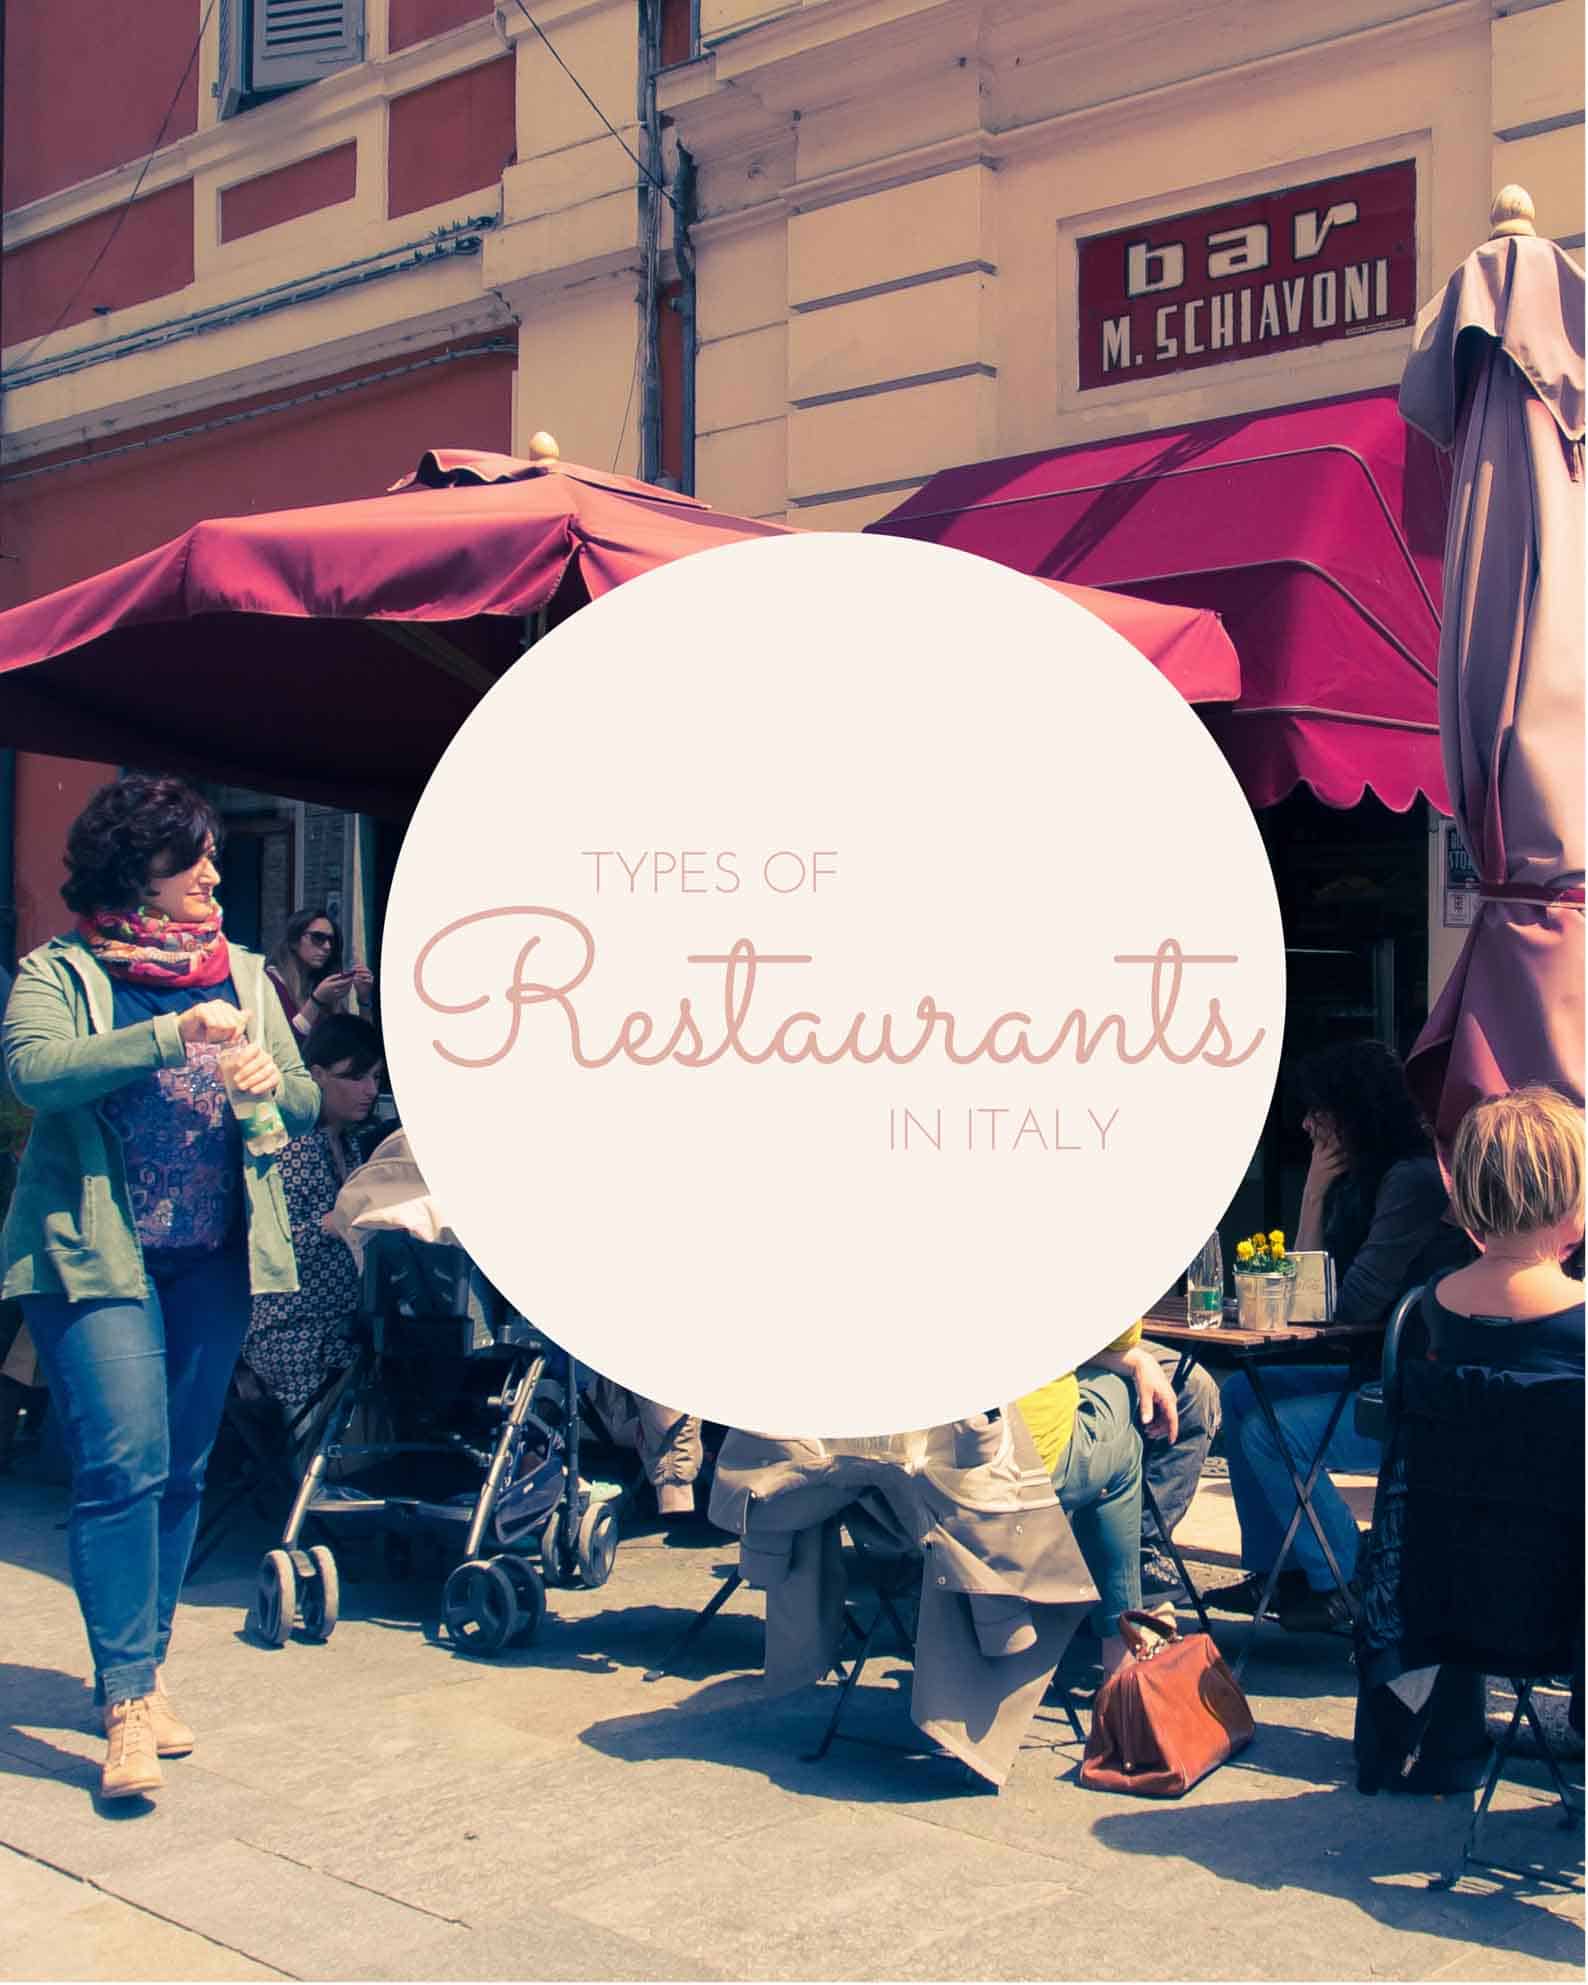 Restaurants in Modena may be called Enoteca, Osteria, Bar, Cafe, Ristorante. So many confusing names for restaurants in Italy! This post explains what they all mean, and which ones are the most expensive.